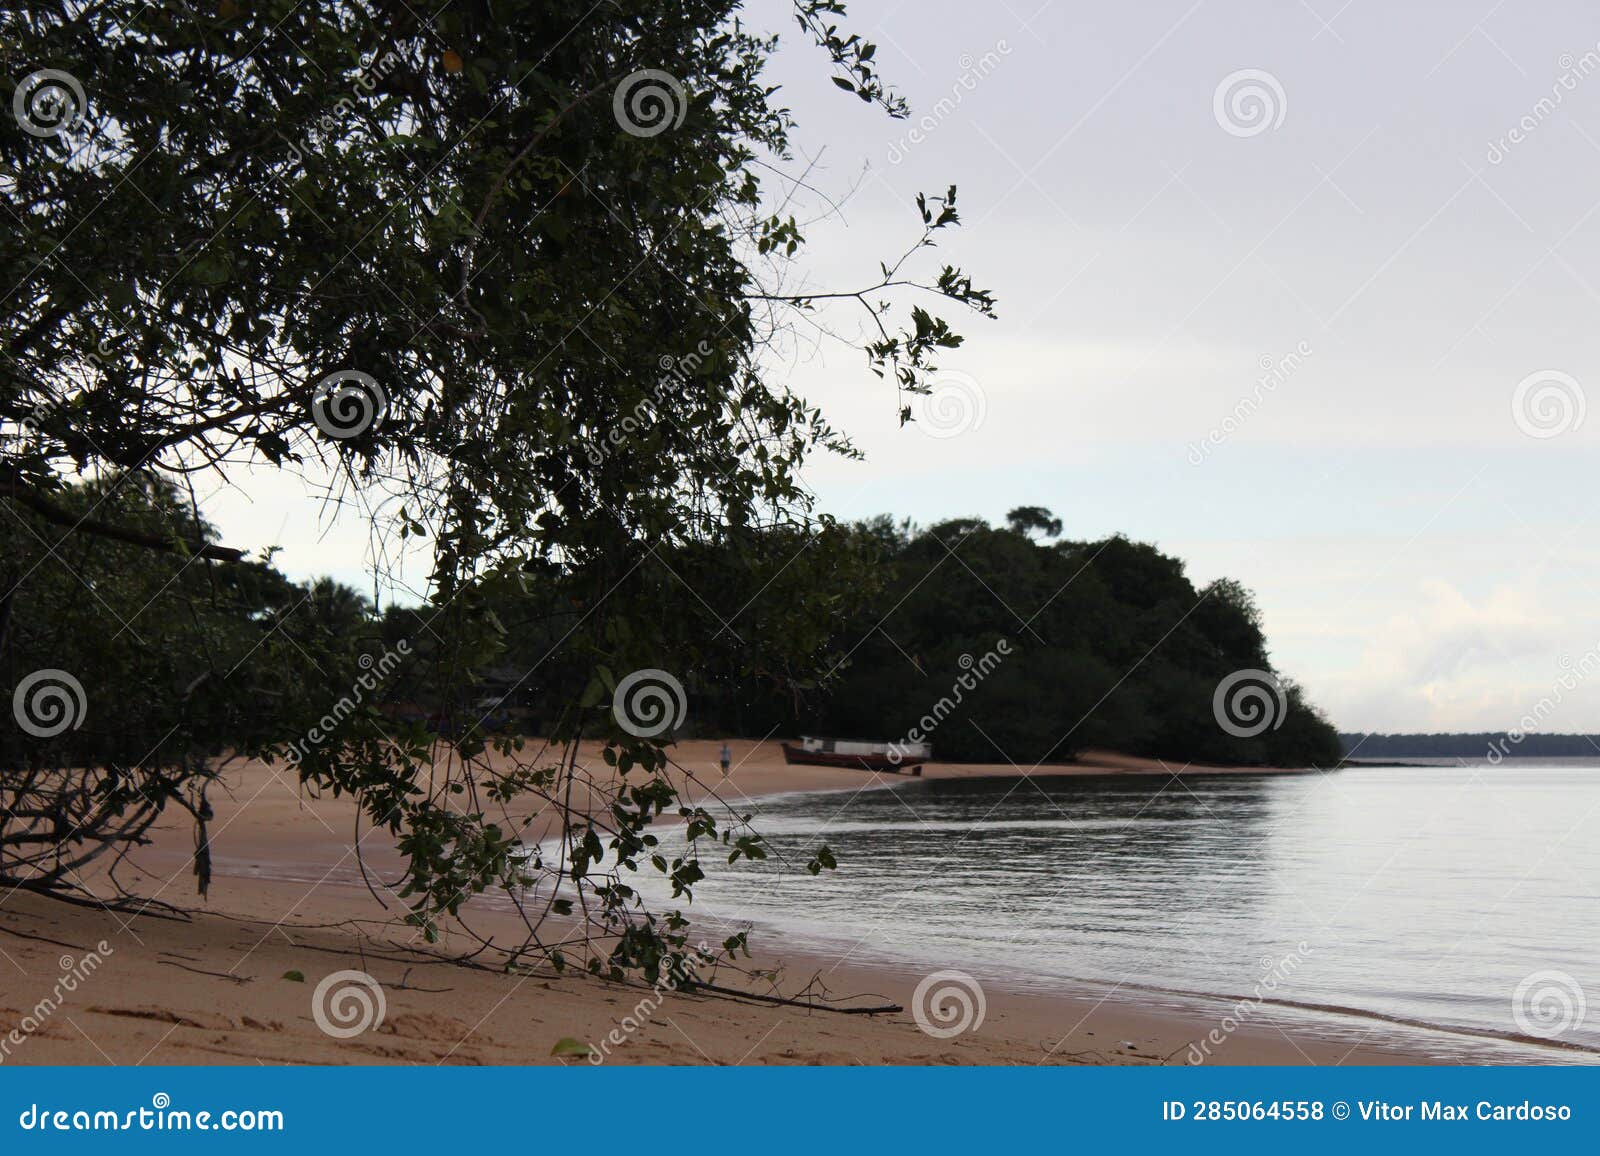 deserted river beach on the island of cotijuba